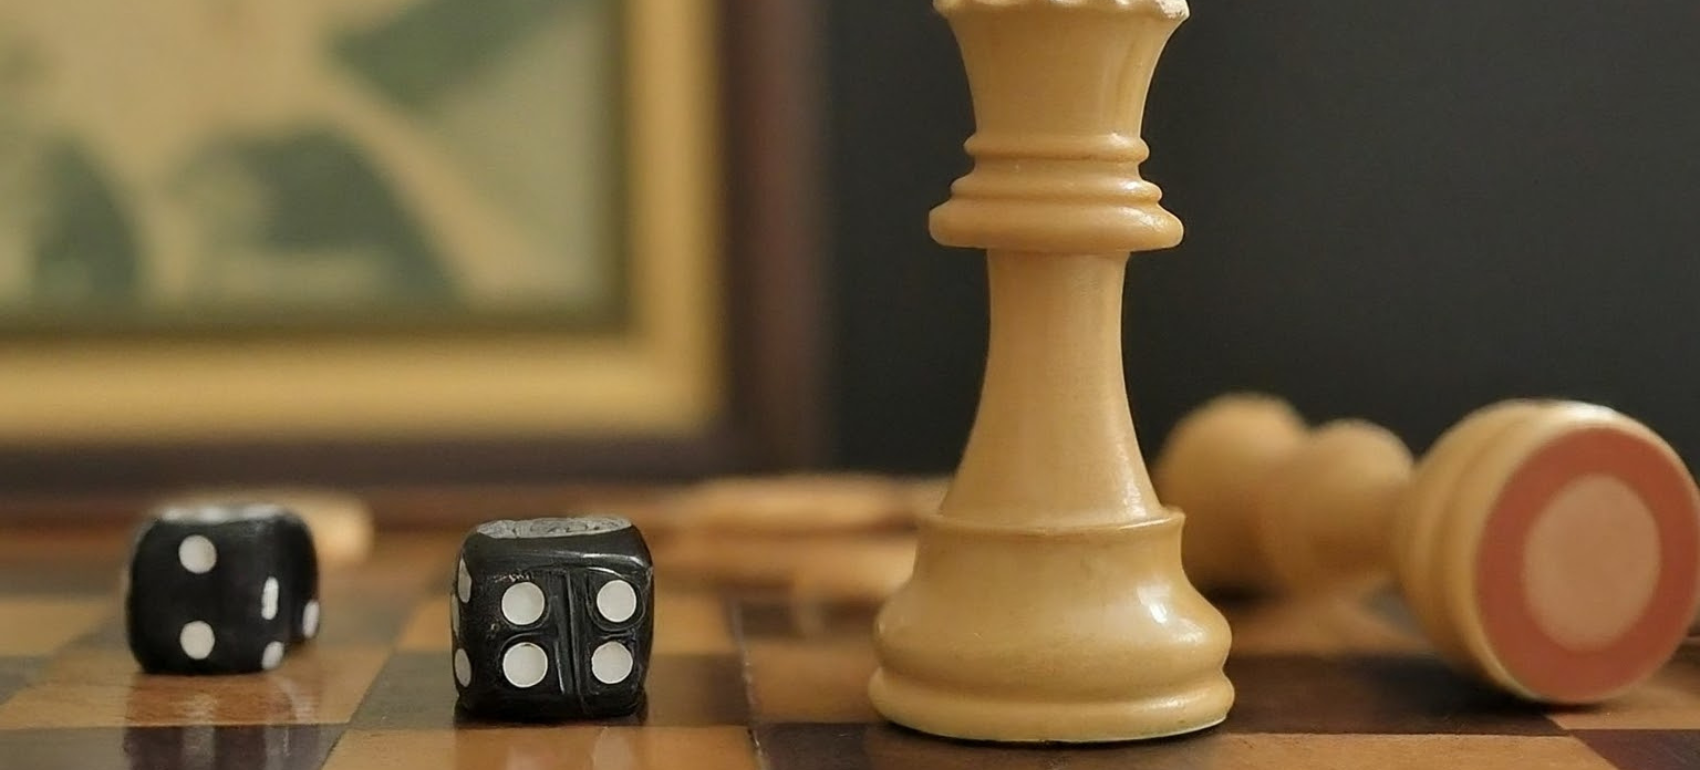 Strategic Bonding: How Chess and Backgammon Can Teach Life Skills During Family Game Nights